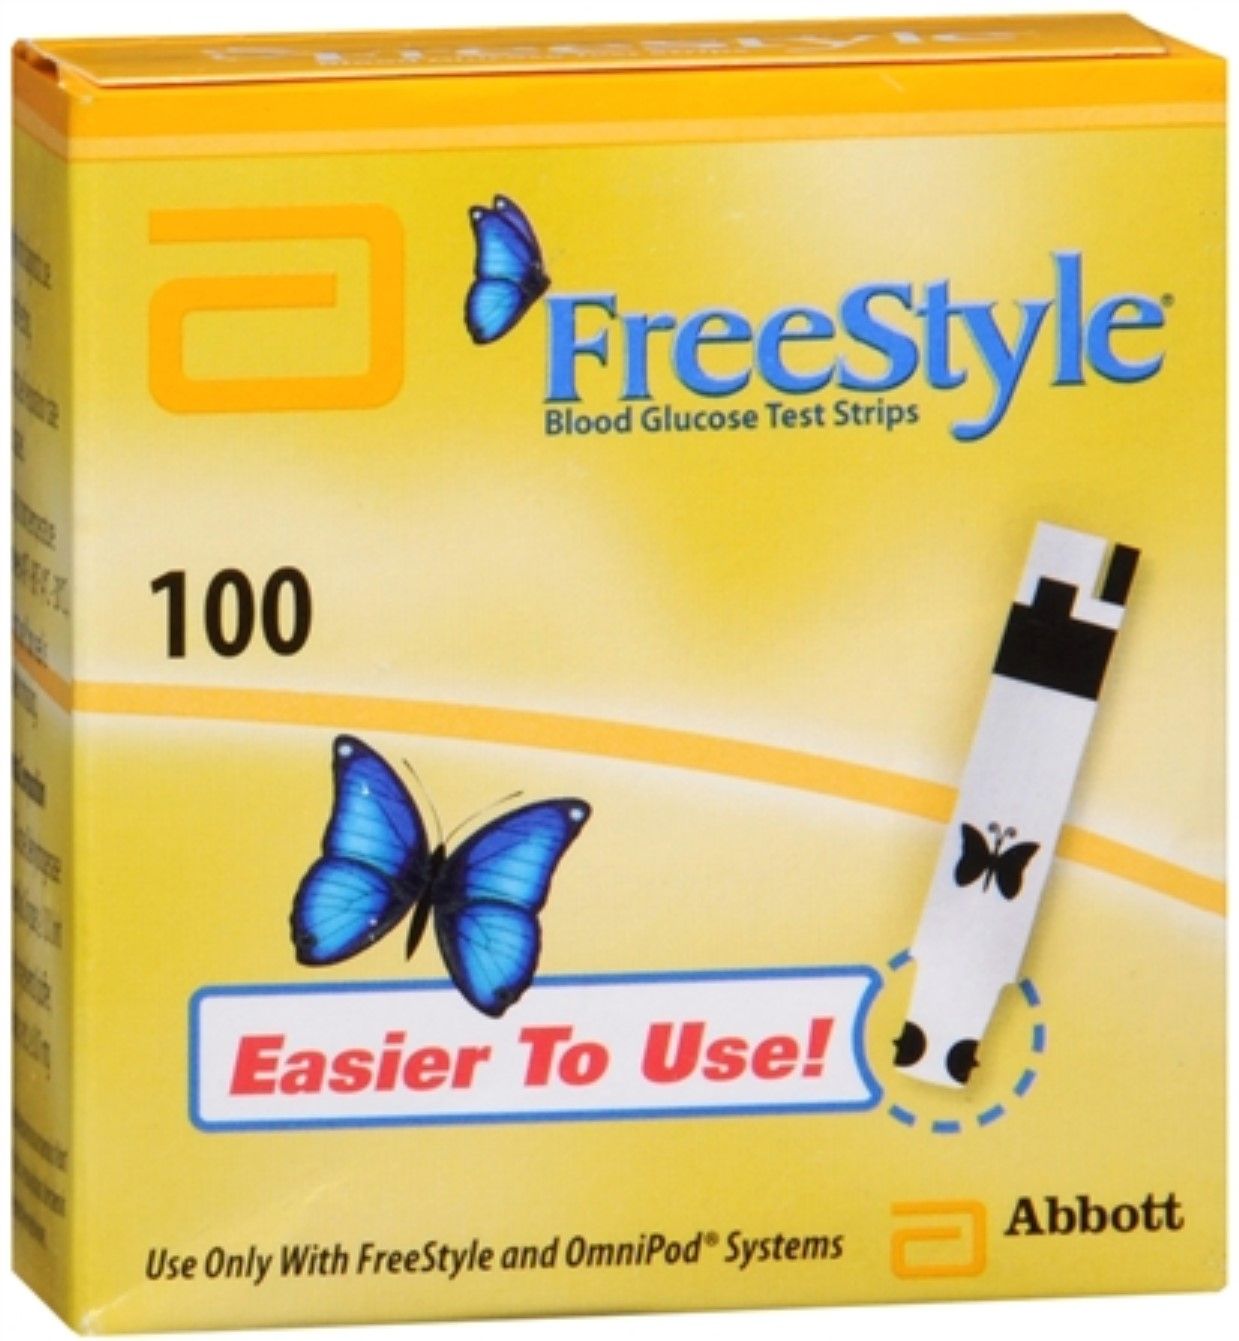 Free style test strips